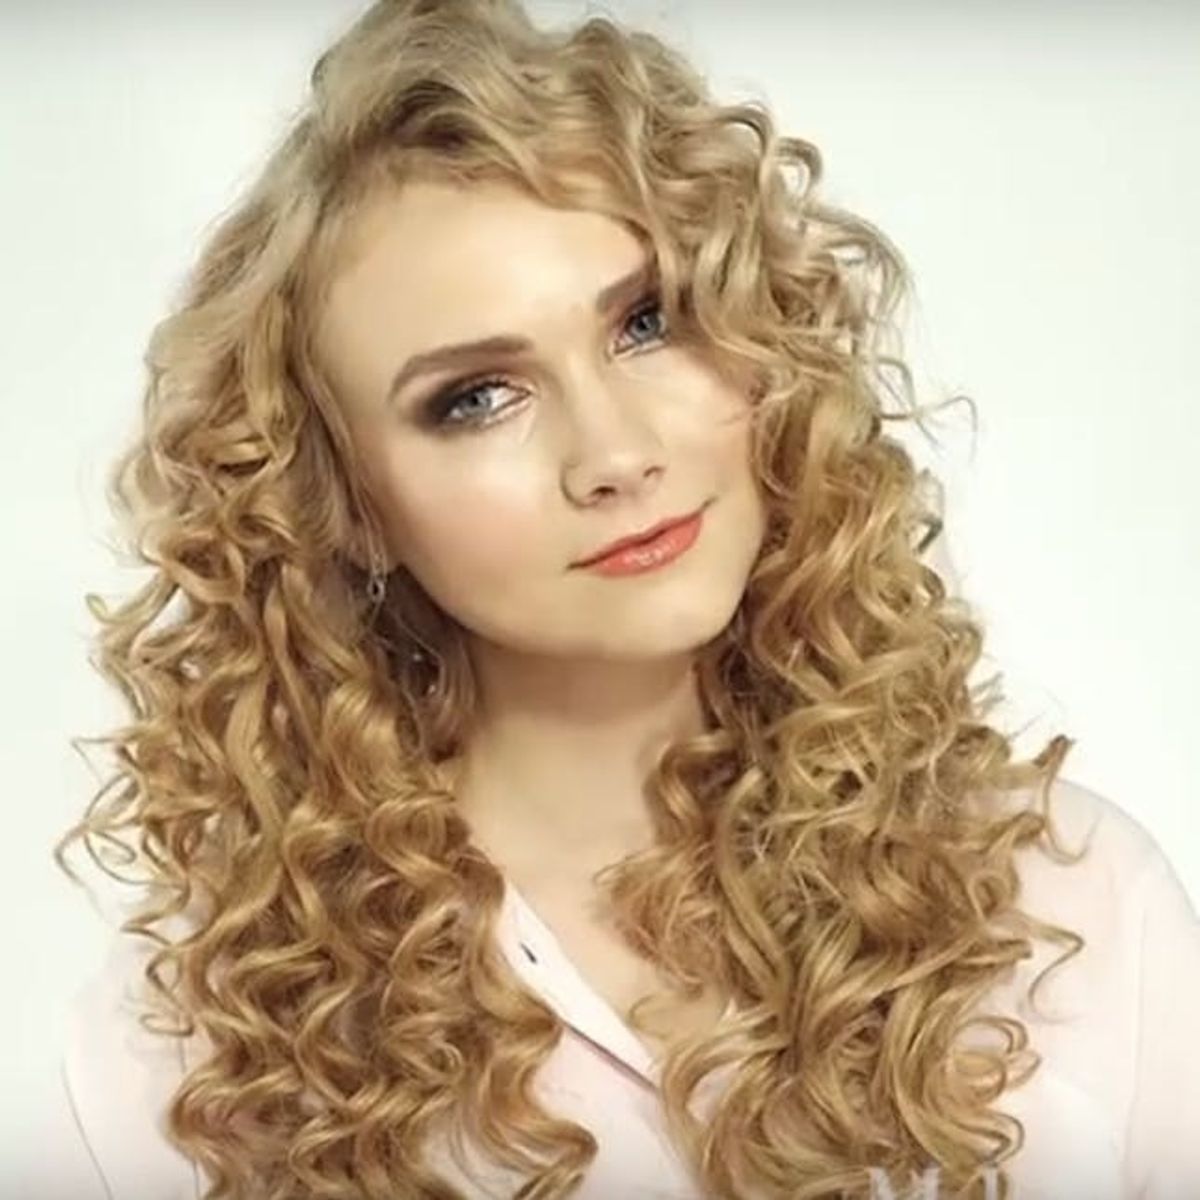 This Makeup Artist Transforms 1 Woman into 6 Versions of Taylor Swift